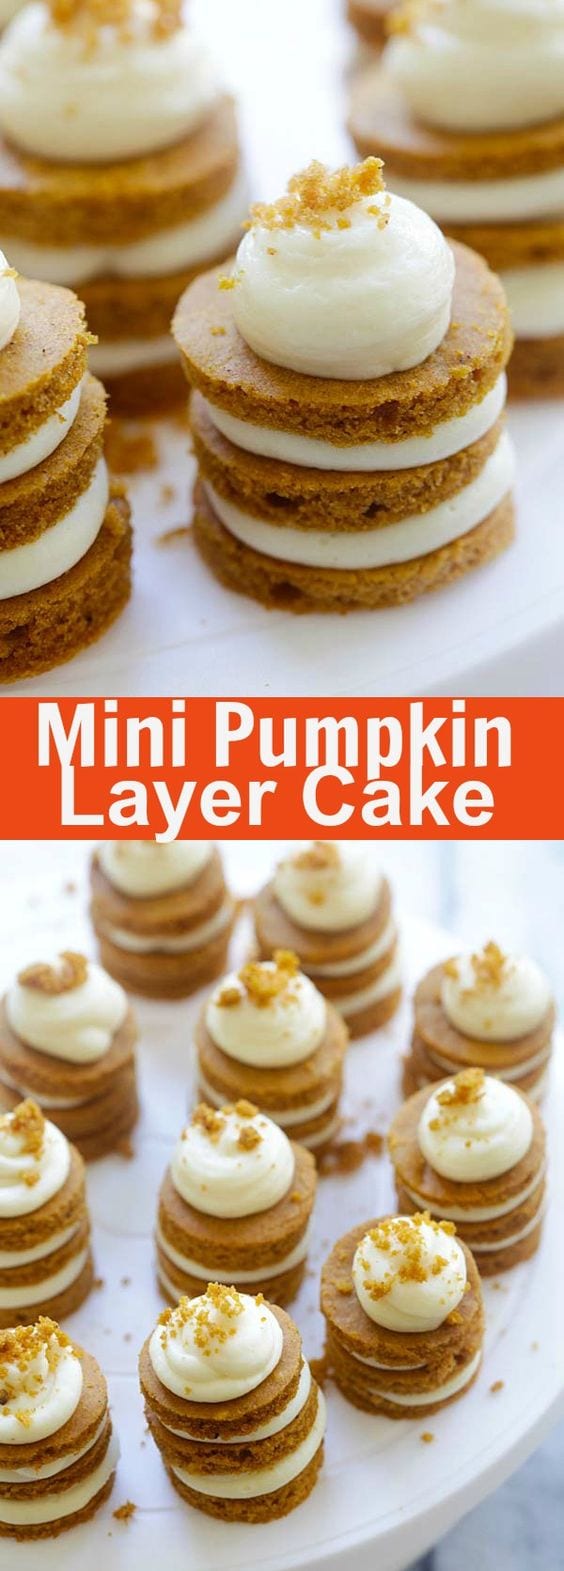 Mini Pumpkin Layer Cake - the cutest pumpkin cake recipe ever! Layers of pumpkin cake with cream cheese frosting, perfect dessert for holidays | rasamalaysia.com